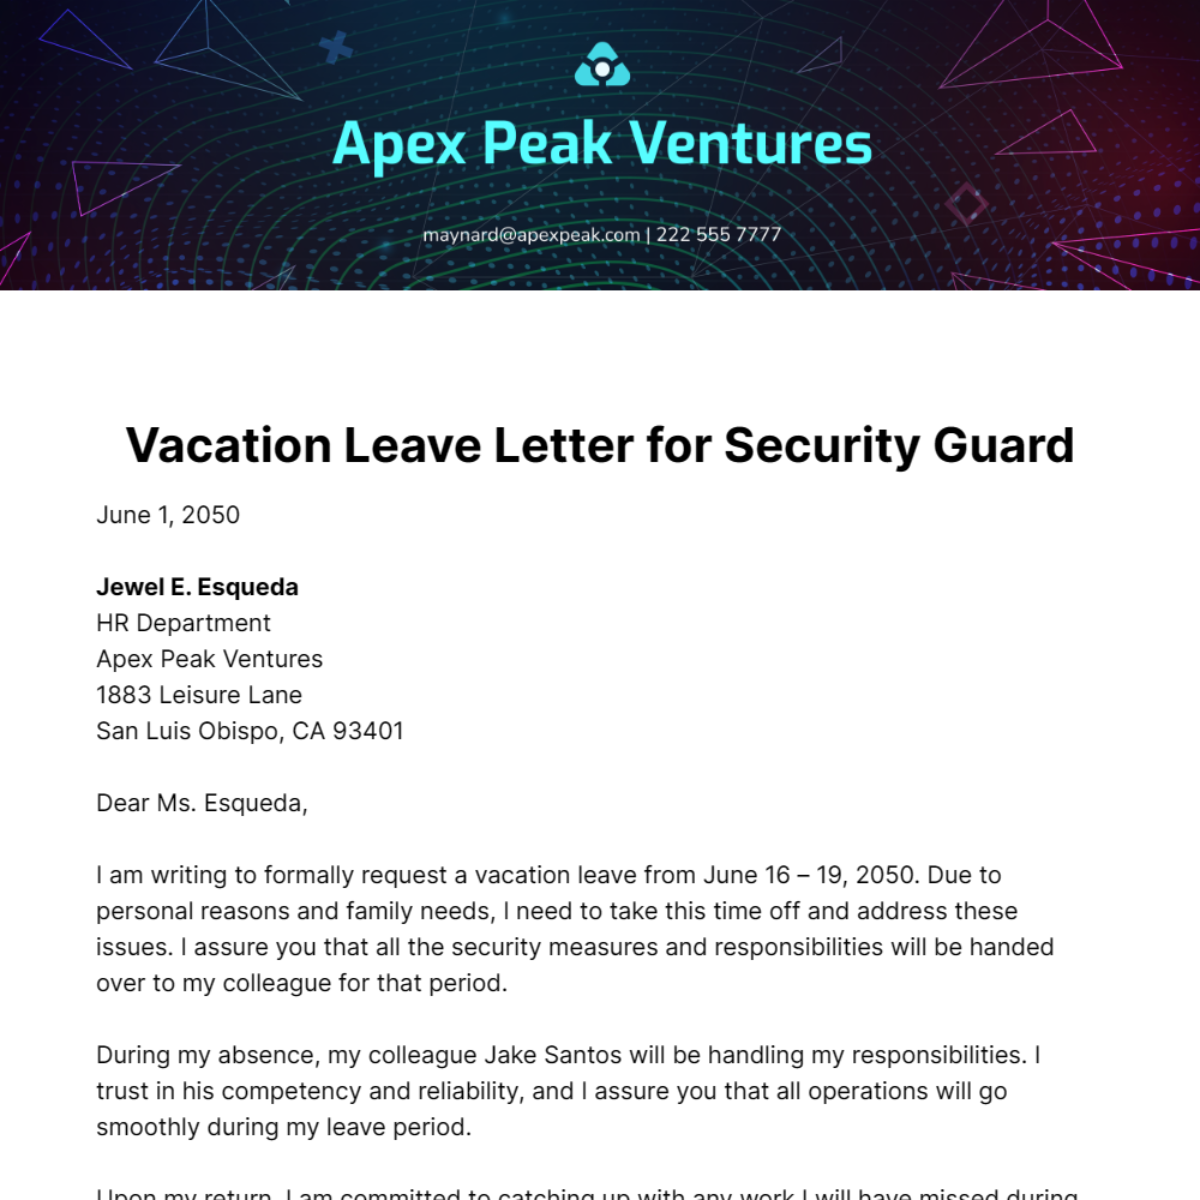 Vacation Leave Letter for Security Guard Template